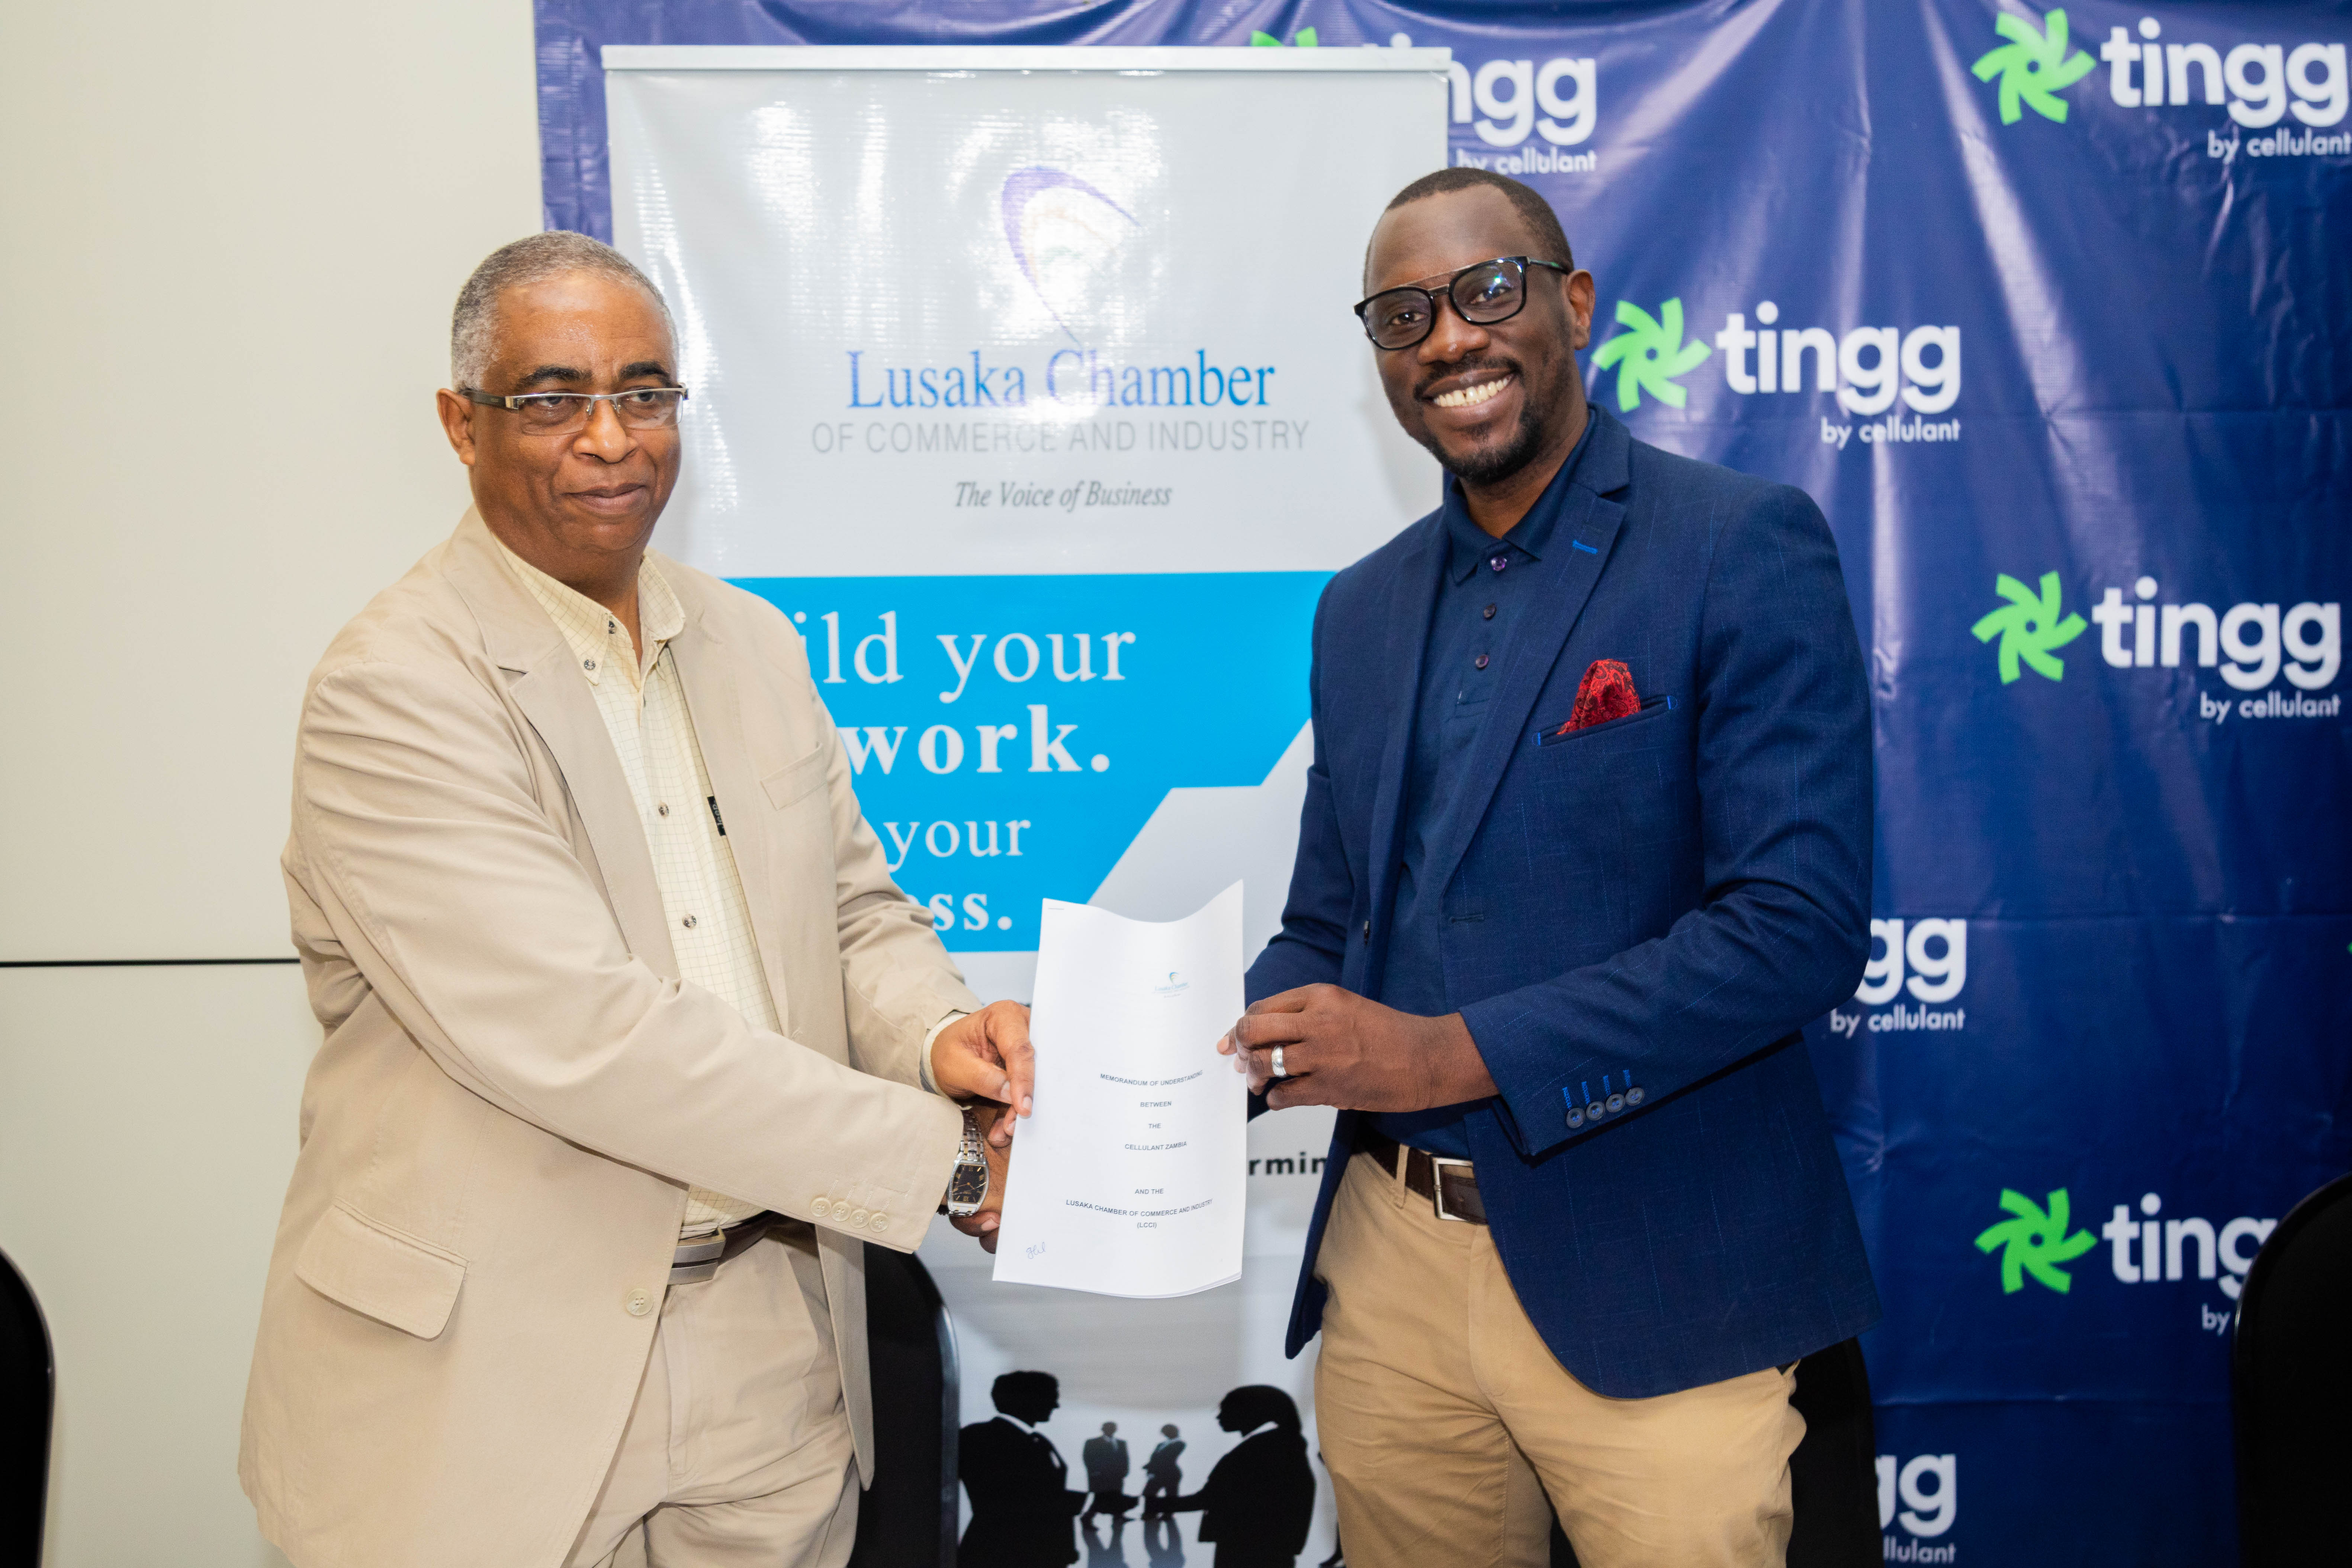 Cellulant joins forces with Lusaka Chamber of Commerce to digitize payments for businesses in Lusaka